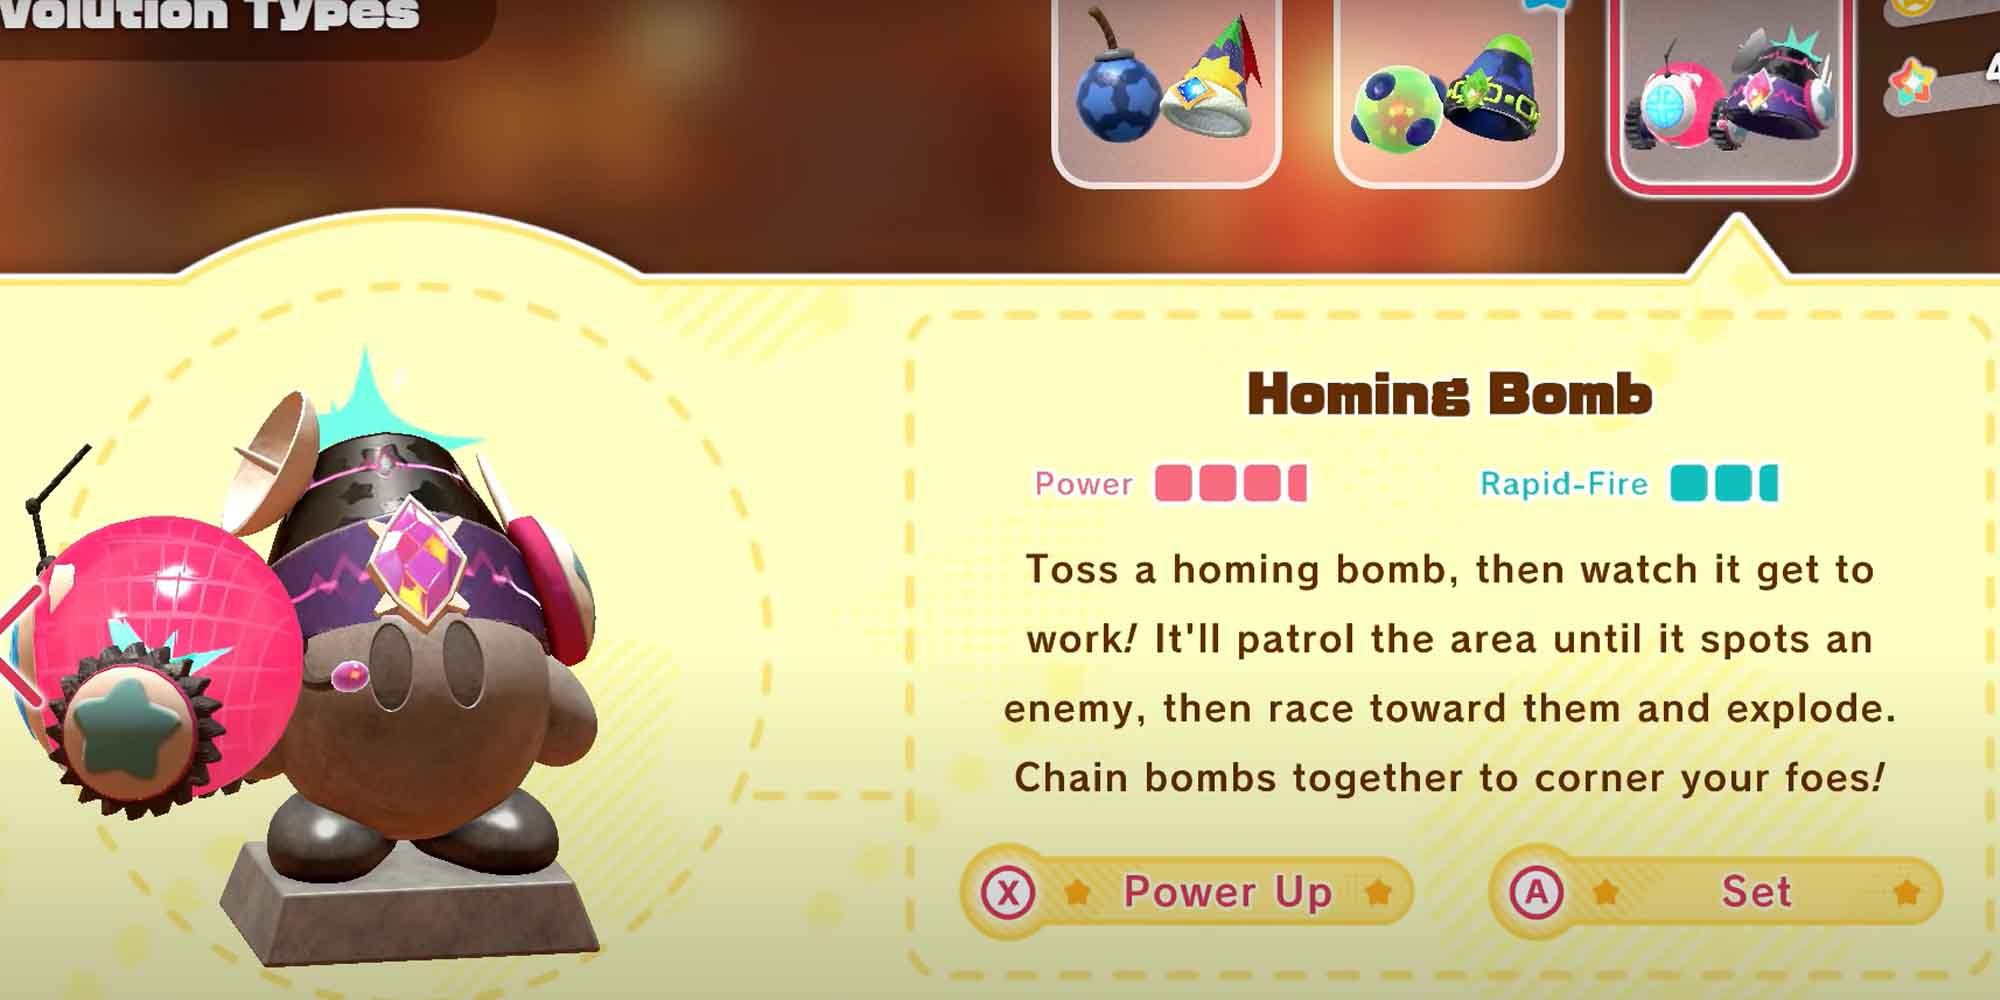 The Homing Bomb upgrade for the Bomb copy ability in Kirby and the Forgotten Land